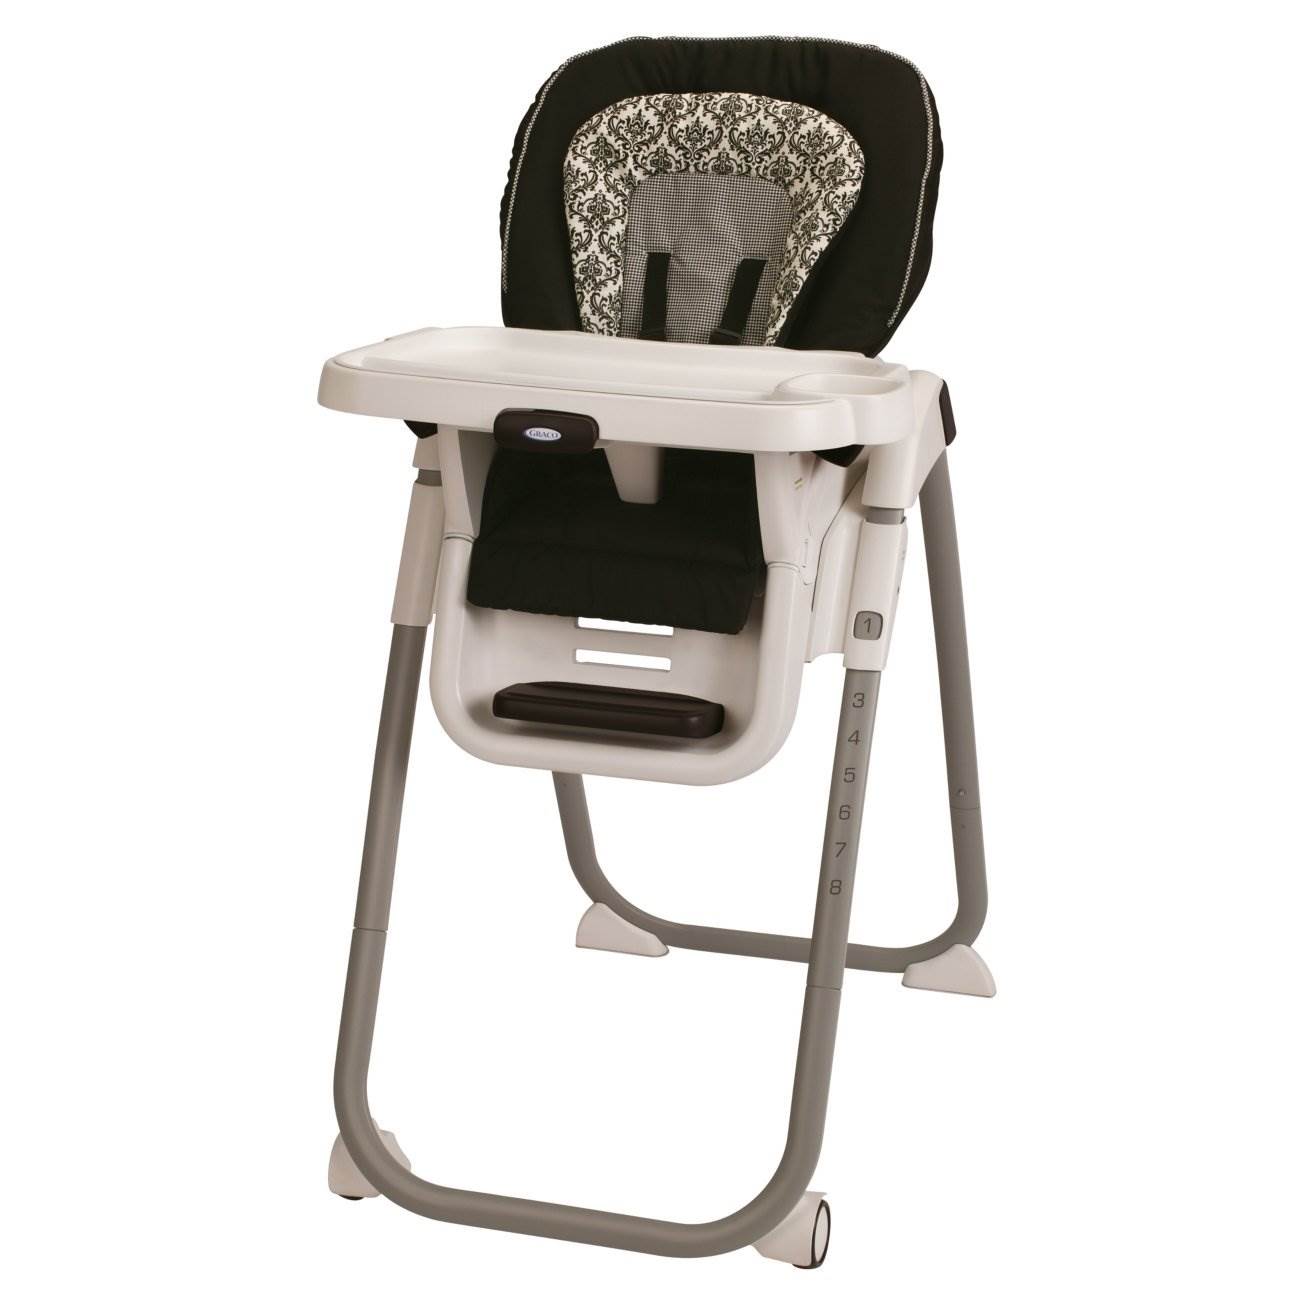 Graco Table Fit Highchair Seating & Feeding System - Rittenhouse | 1852649 - image 1 of 3